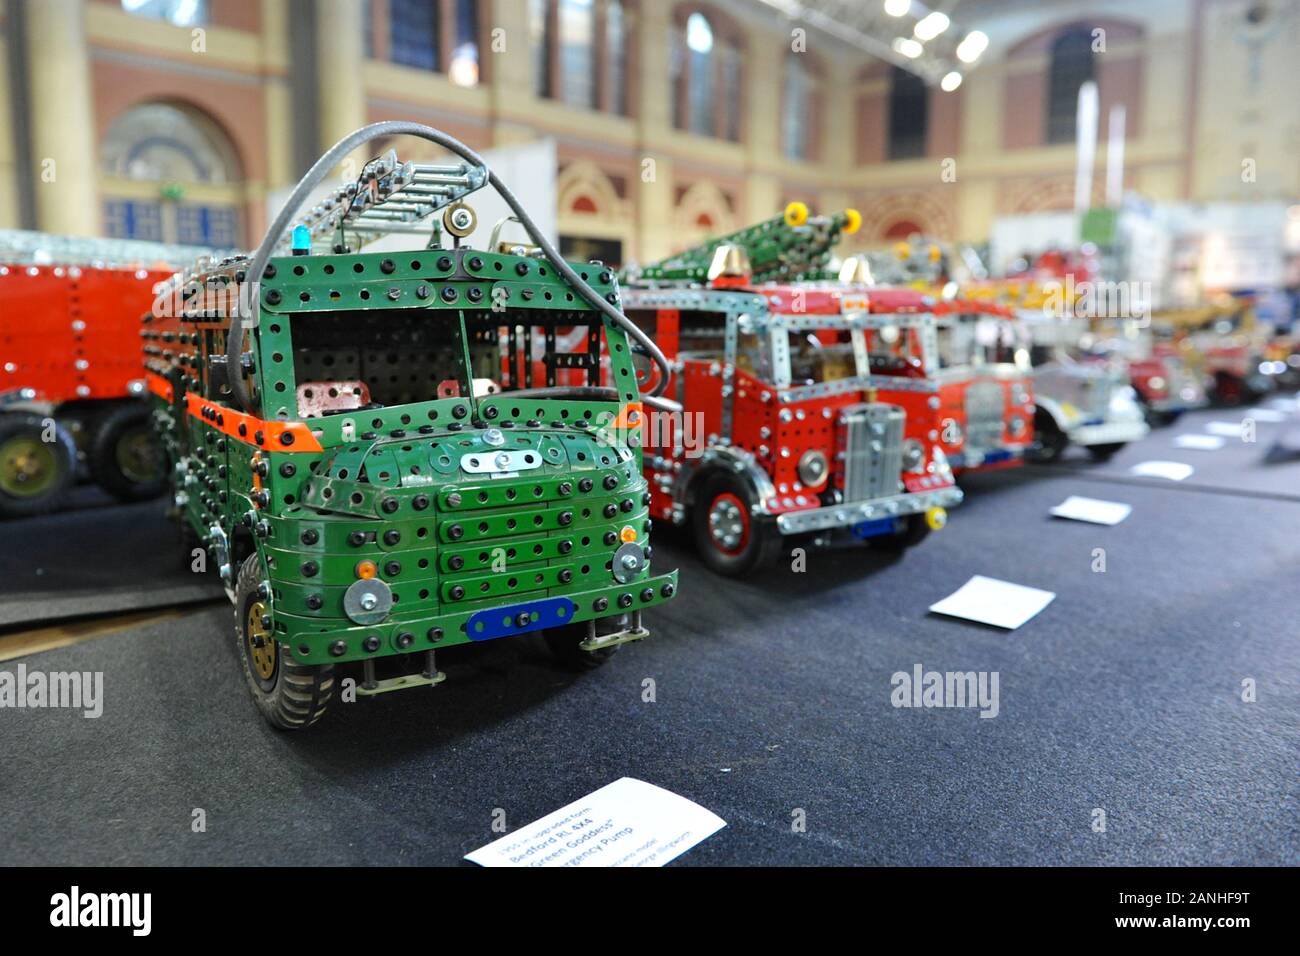 A Meccano model of a Green Goddess Fire Engine (Bedford RL 4X4) on display on the opening day of the London Model Engineering Exhibition opened today at Alexandra Palace, London.  The model is part of the collection of Warwick District Councillor and retired chartered Mechanical Engineer George Illingworth who is displaying 30 of his hand-built large 1/12 scale Meccano Fire Engines from his 60+ magnificent collection.  The show is one of the largest modelling exhibitions in the UK, blending the full spectrum of model creation from traditional model engineering, steam locomotives and traction e Stock Photo